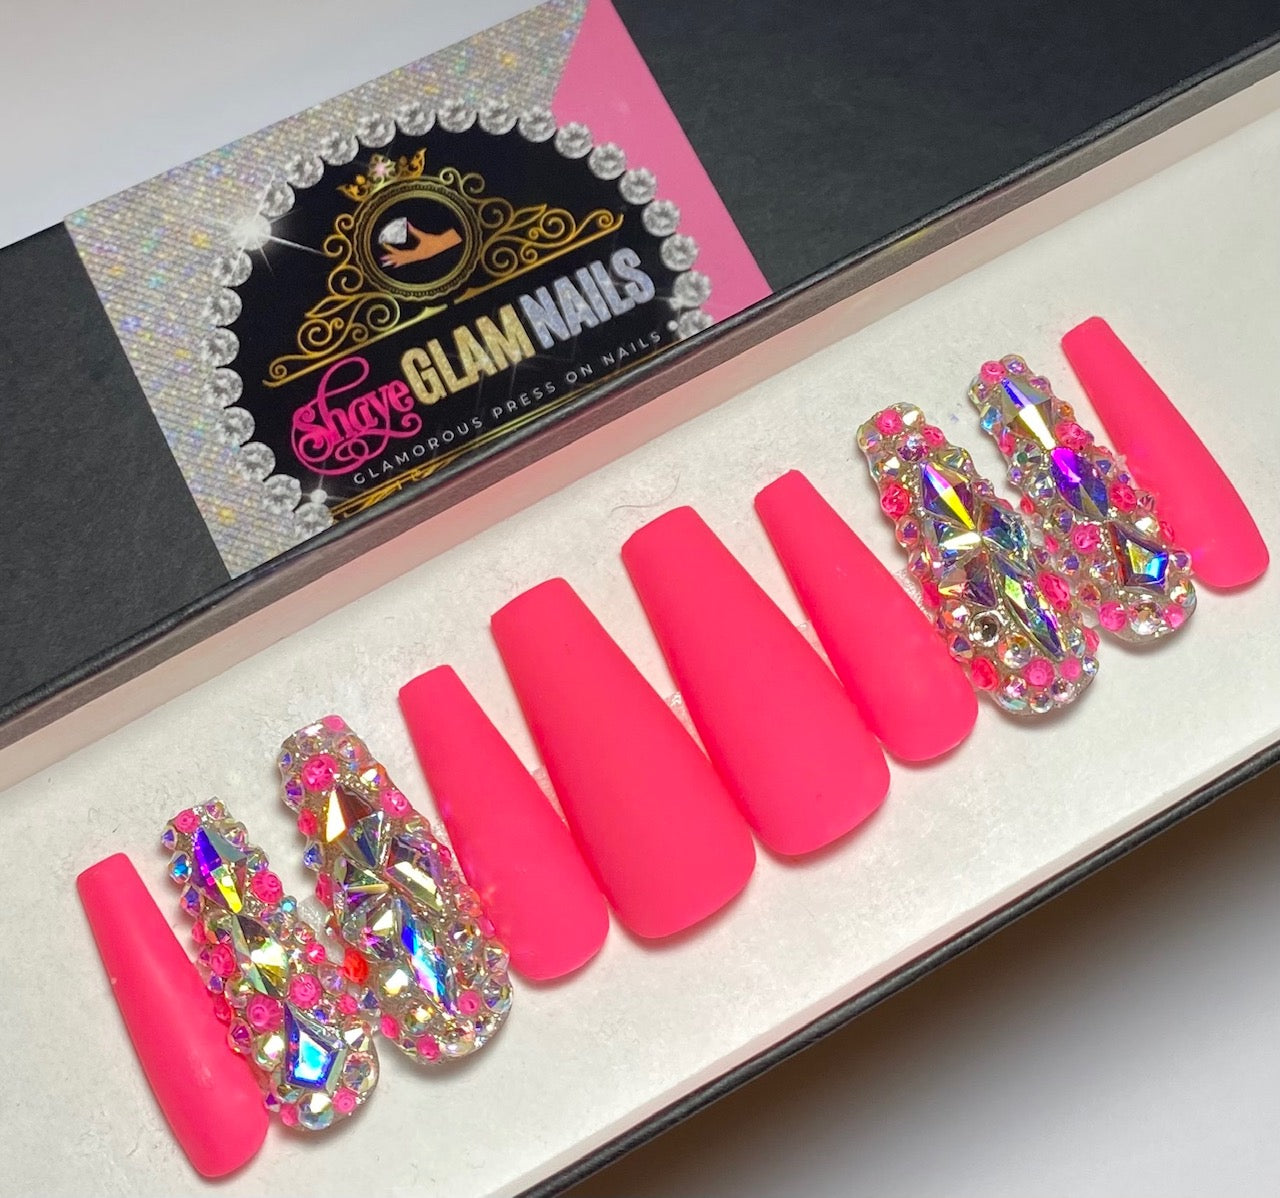 Colorful Bling Style - Two Bling Nails